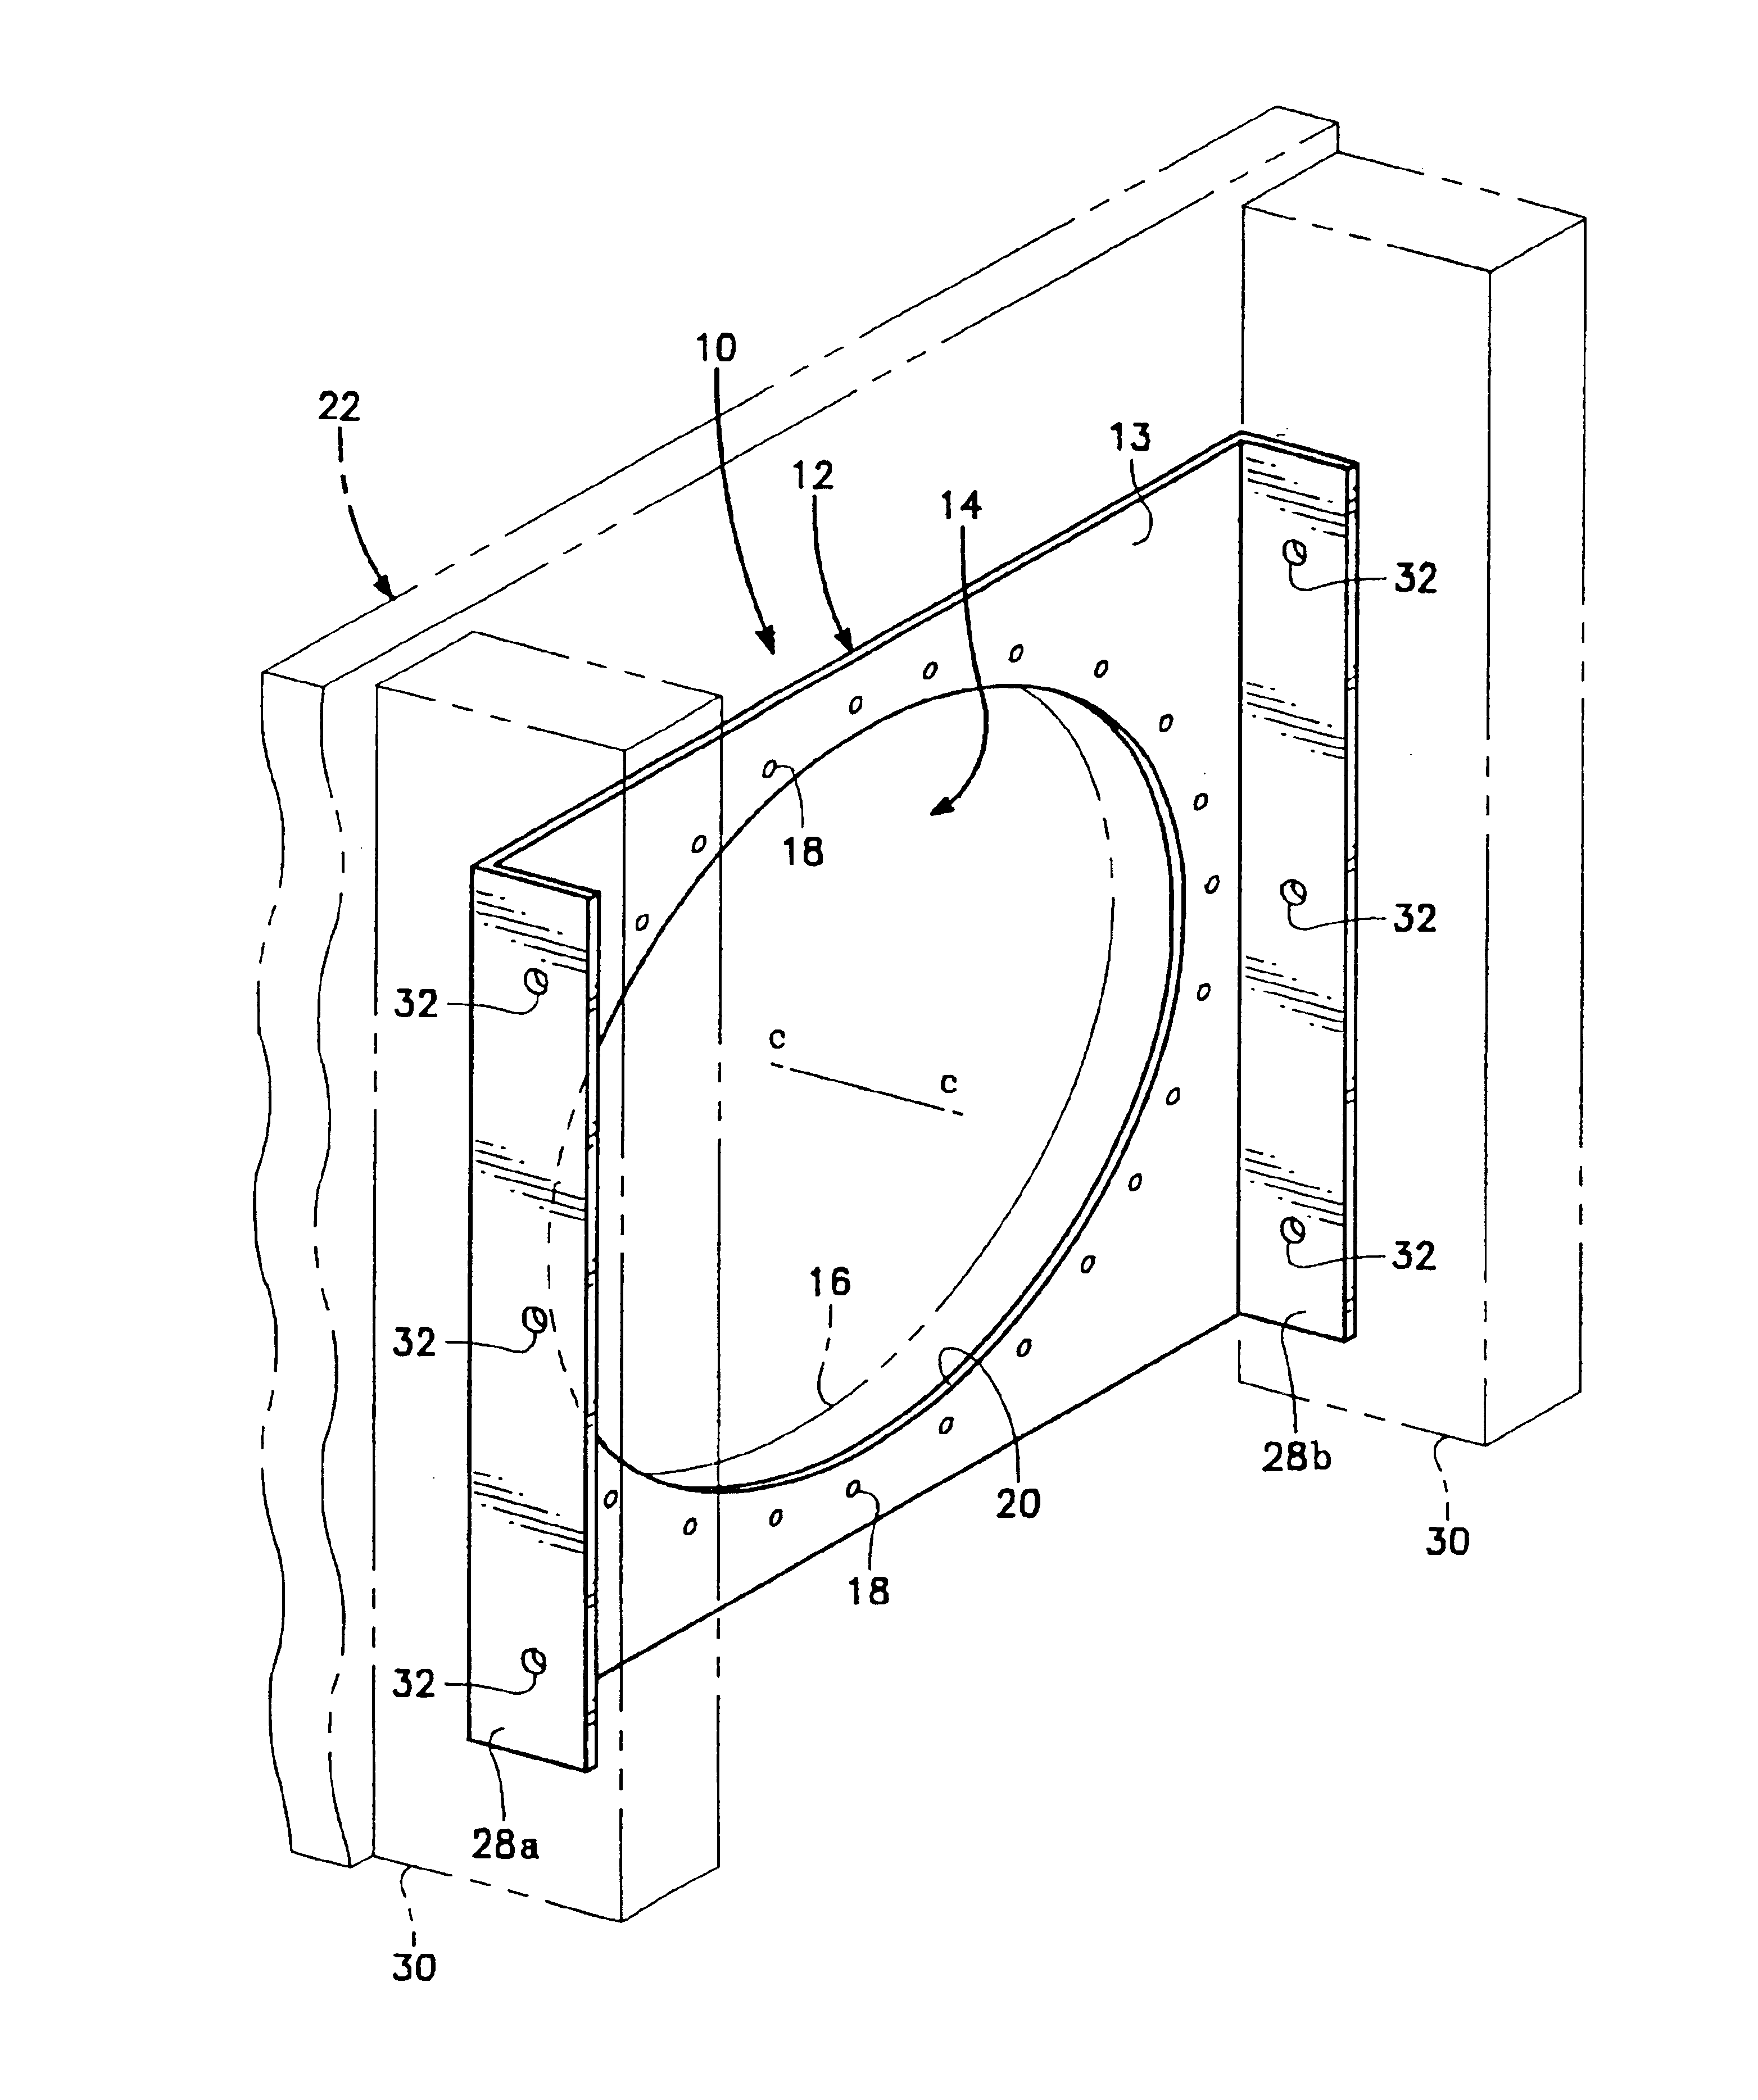 Reinforcement plate for a structural member